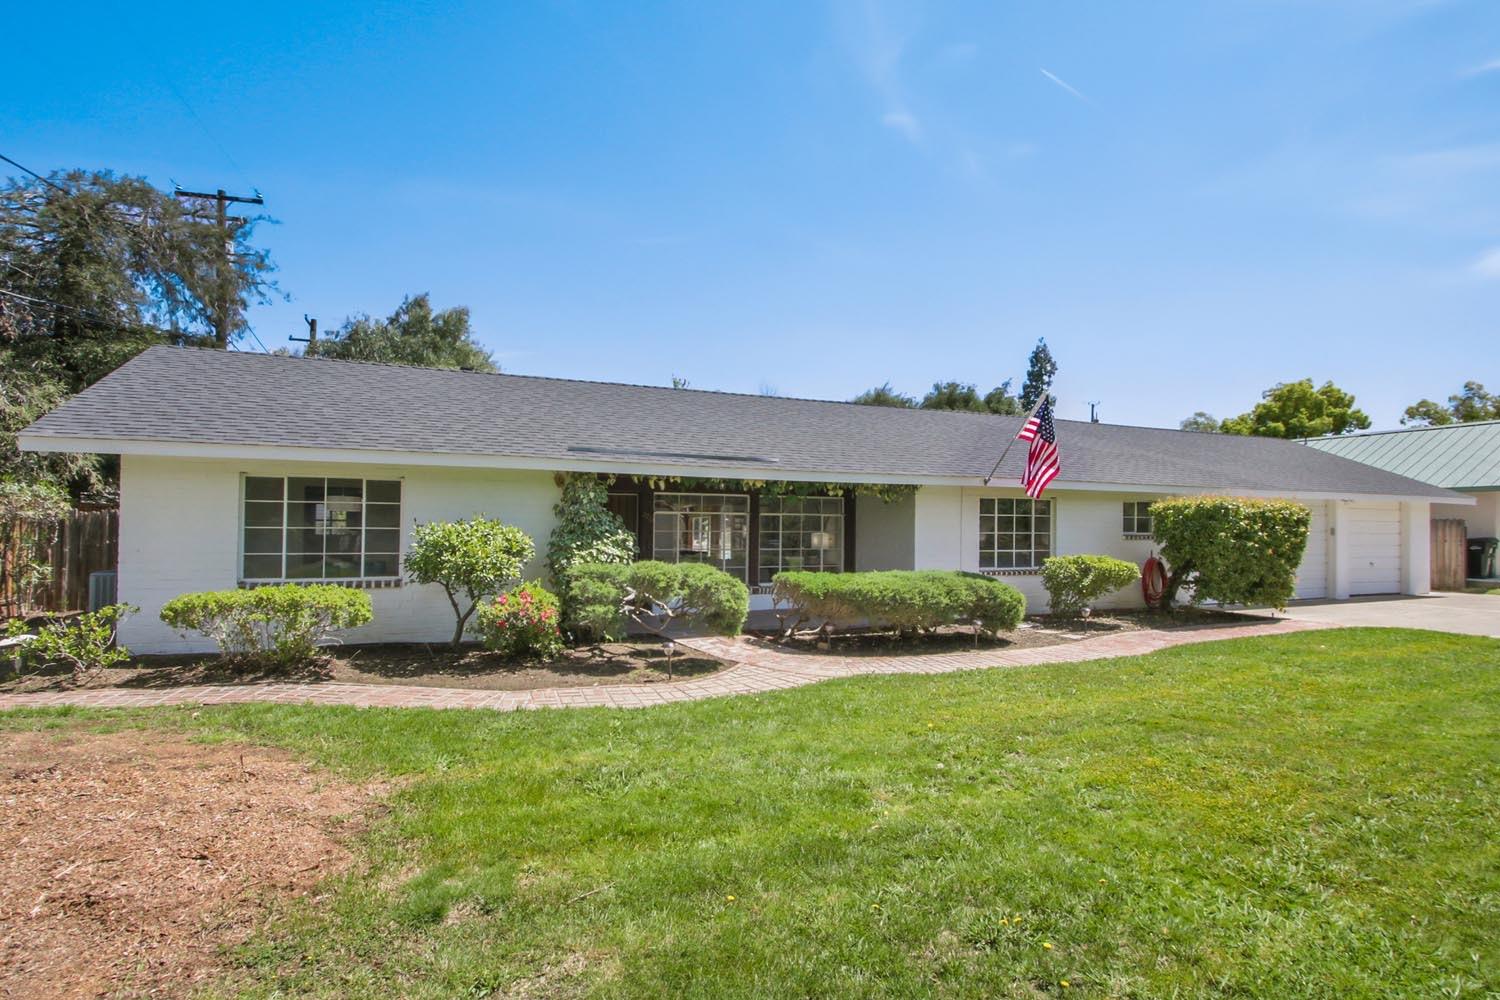 Welcome to 2710 Creekside Ln, where vintage charm meets modern comfort in one of Sacramento's most s